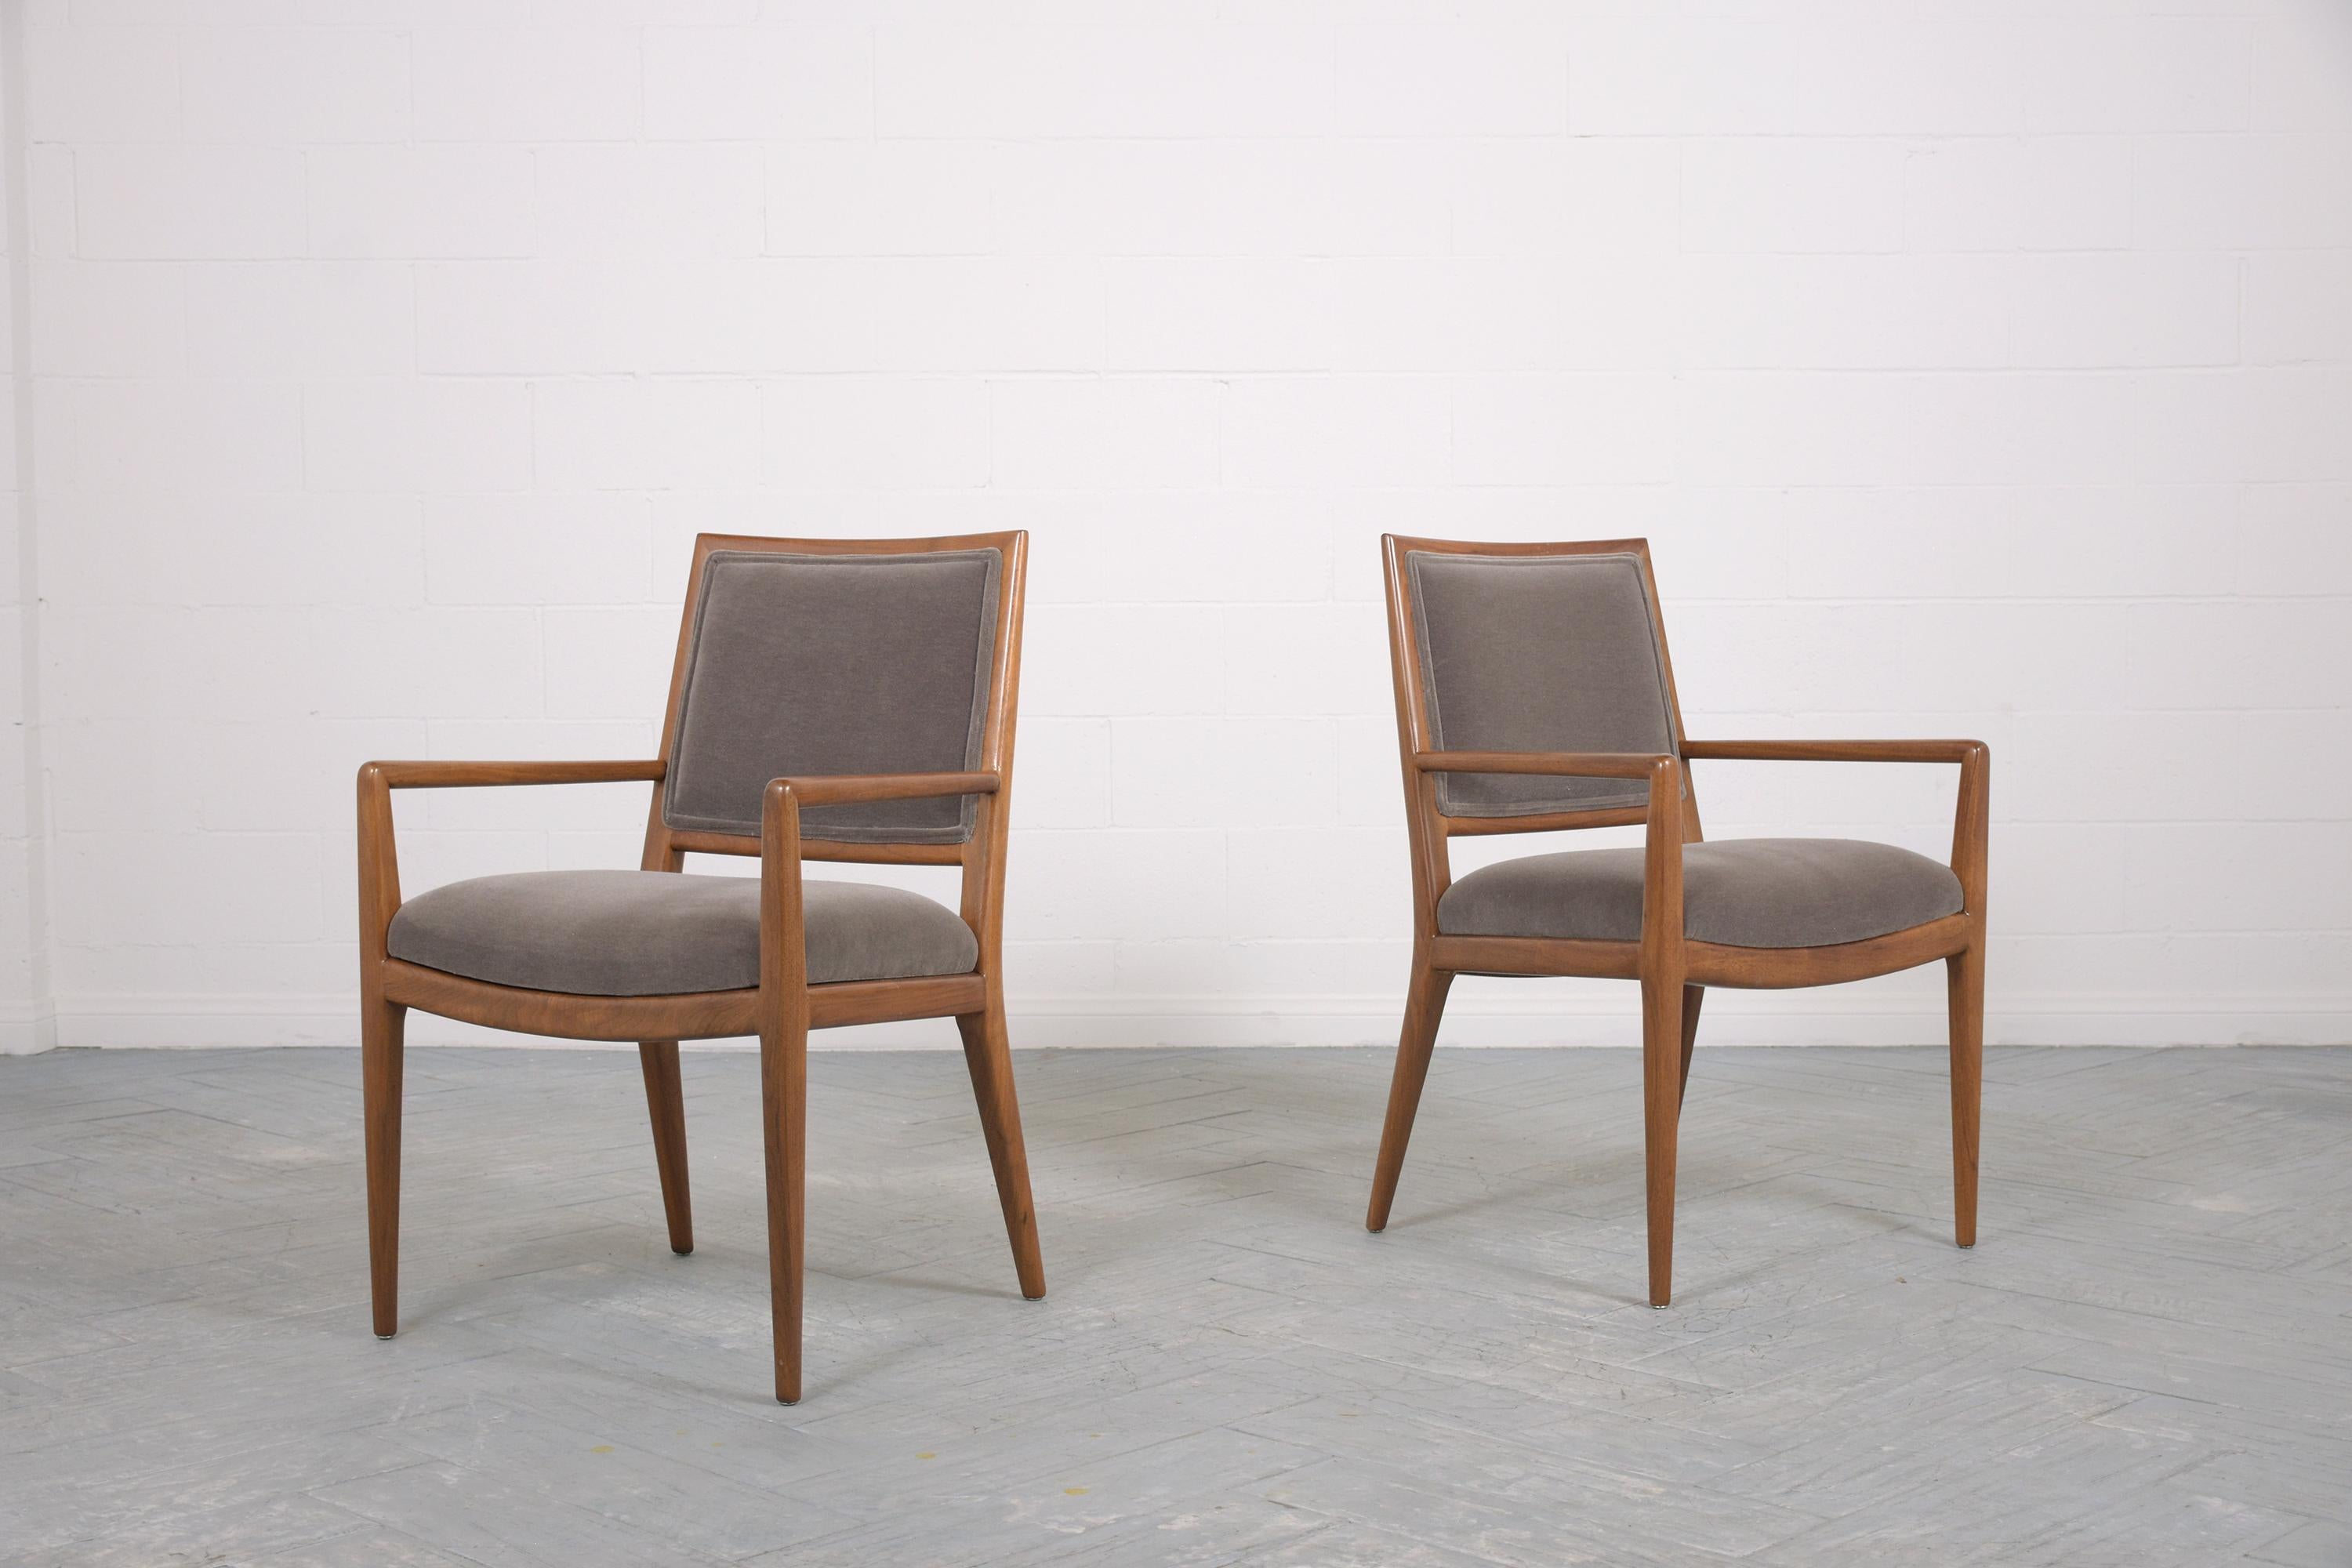 Introducing a remarkable pair of vintage mid-century modern armchairs, reminiscent of the iconic Robsjohn Gibbings style from the 1960s. With a legacy steeped in design brilliance, these chairs, masterfully handcrafted from premium walnut wood, have